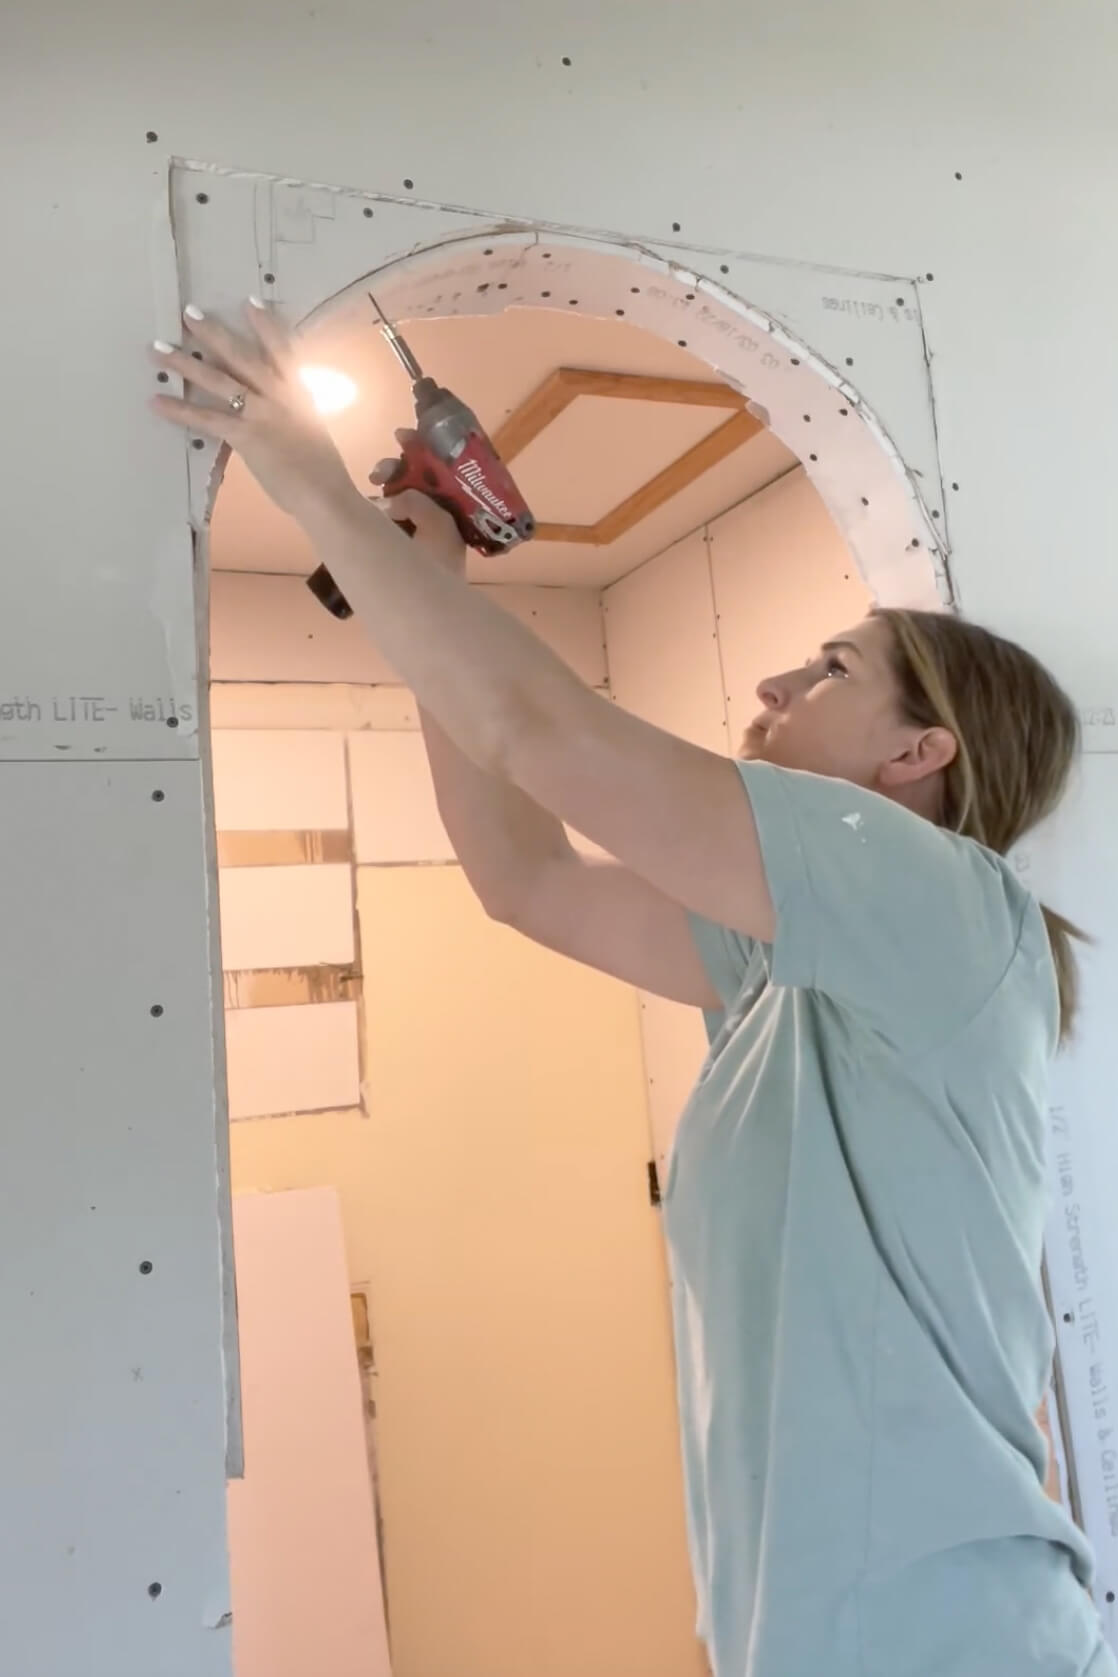 Adding drywall to an arched doorway. 